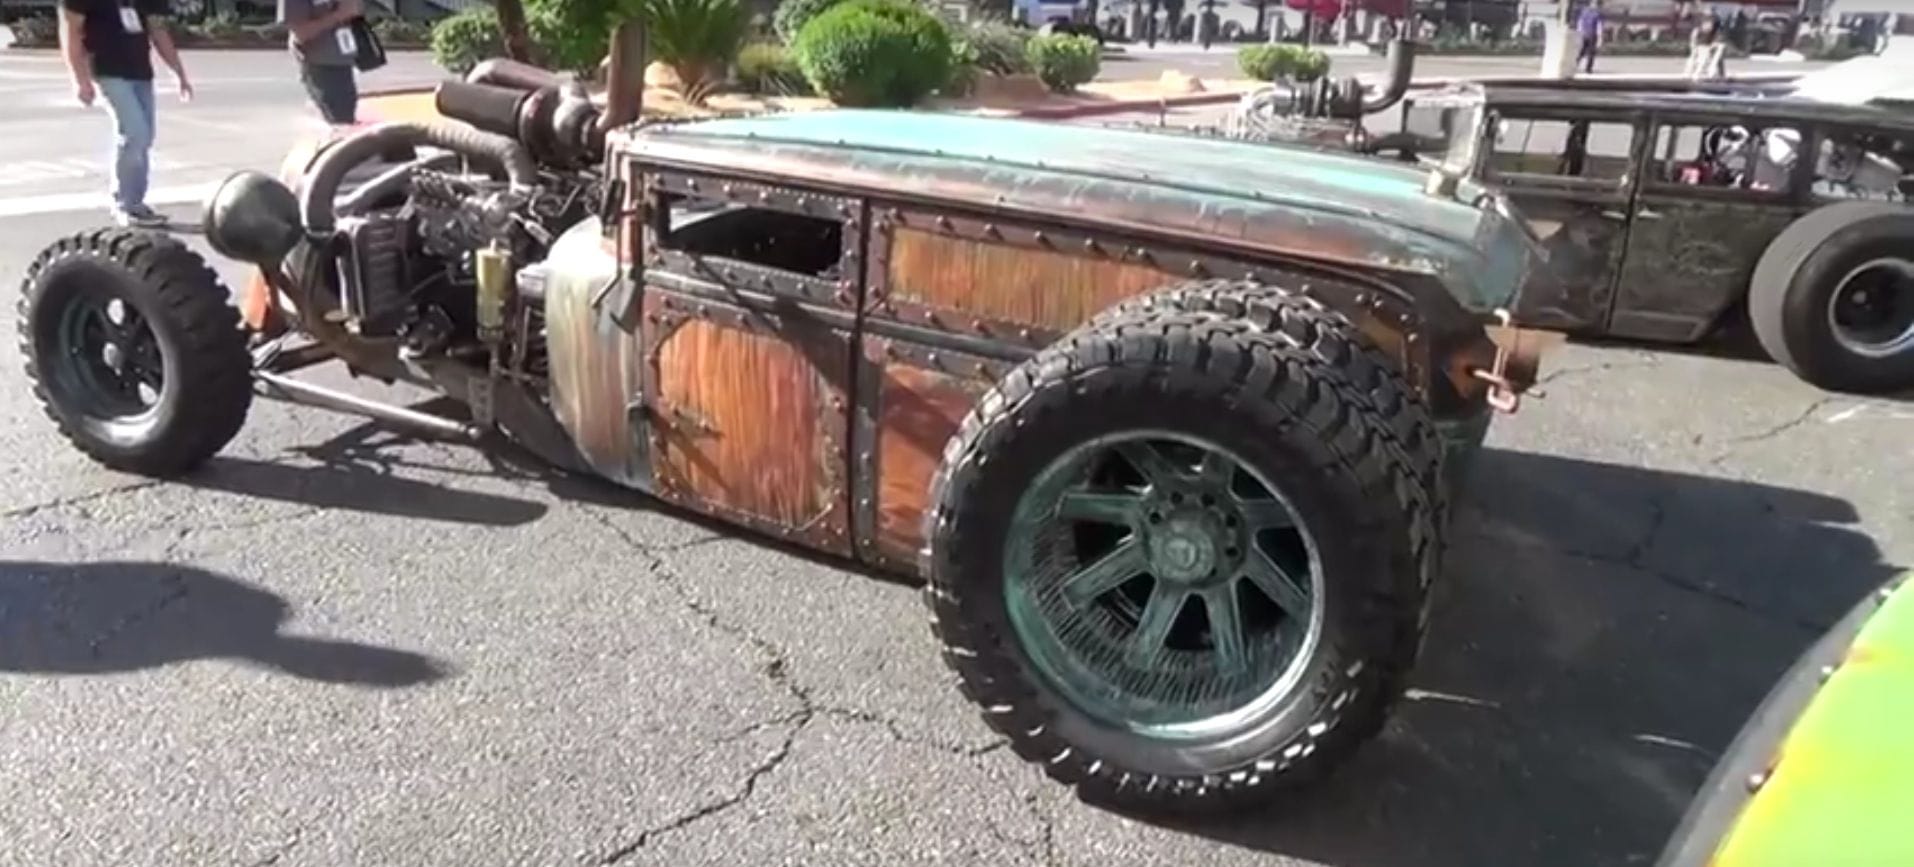 80-welderup_s_dually_rat_rods_have_steampunk_look_nailed_video_102467_1_851b3cb0353db6a4573df4bcf32abc30cf8fbeb8.jpg